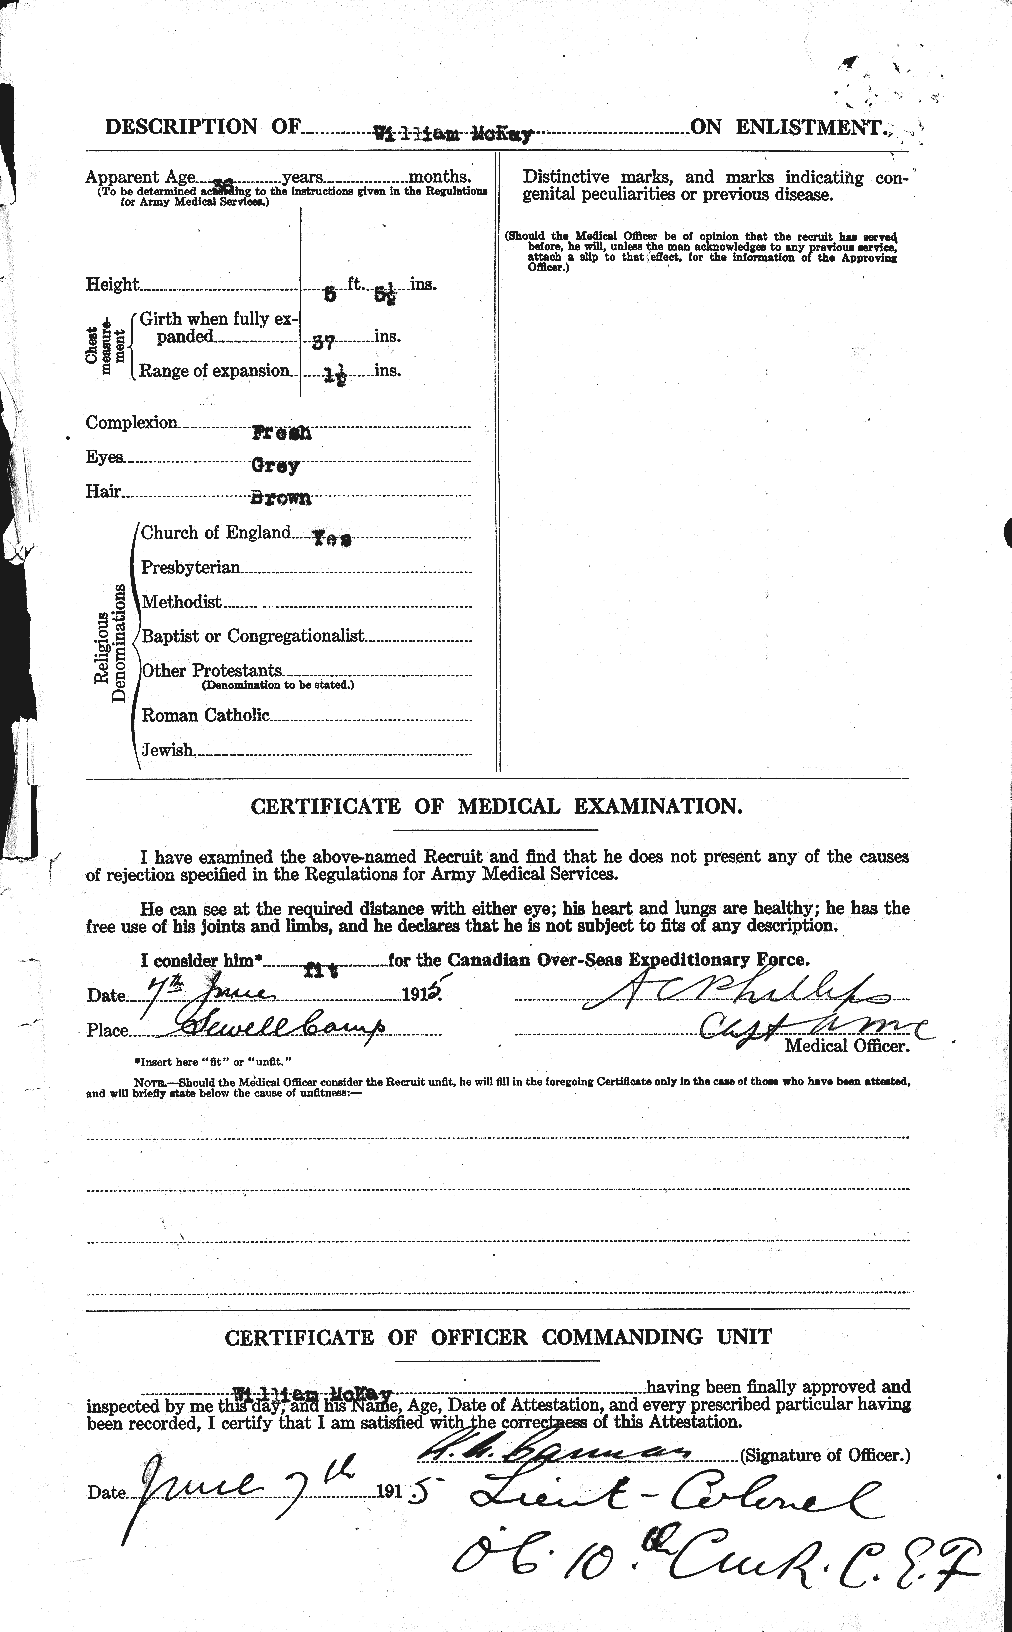 Personnel Records of the First World War - CEF 530218b